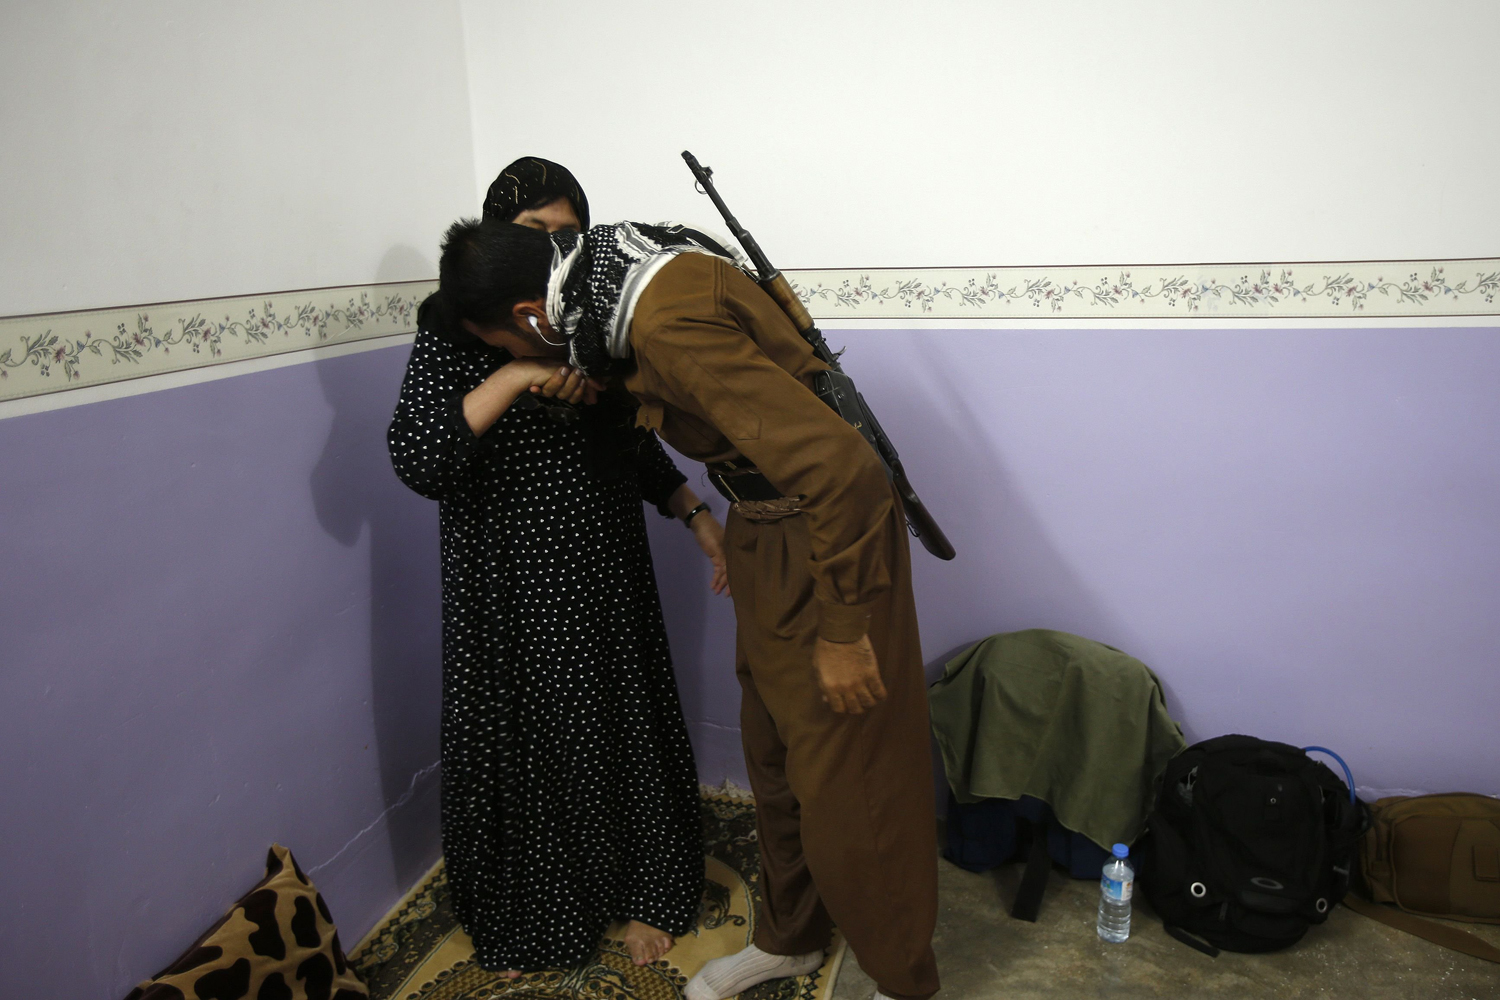 Mother says goodbye to her son, a volunteer in the Kurdish peshmerga forces, as he prepares to leave home for the front line near Tuz Khurmatu